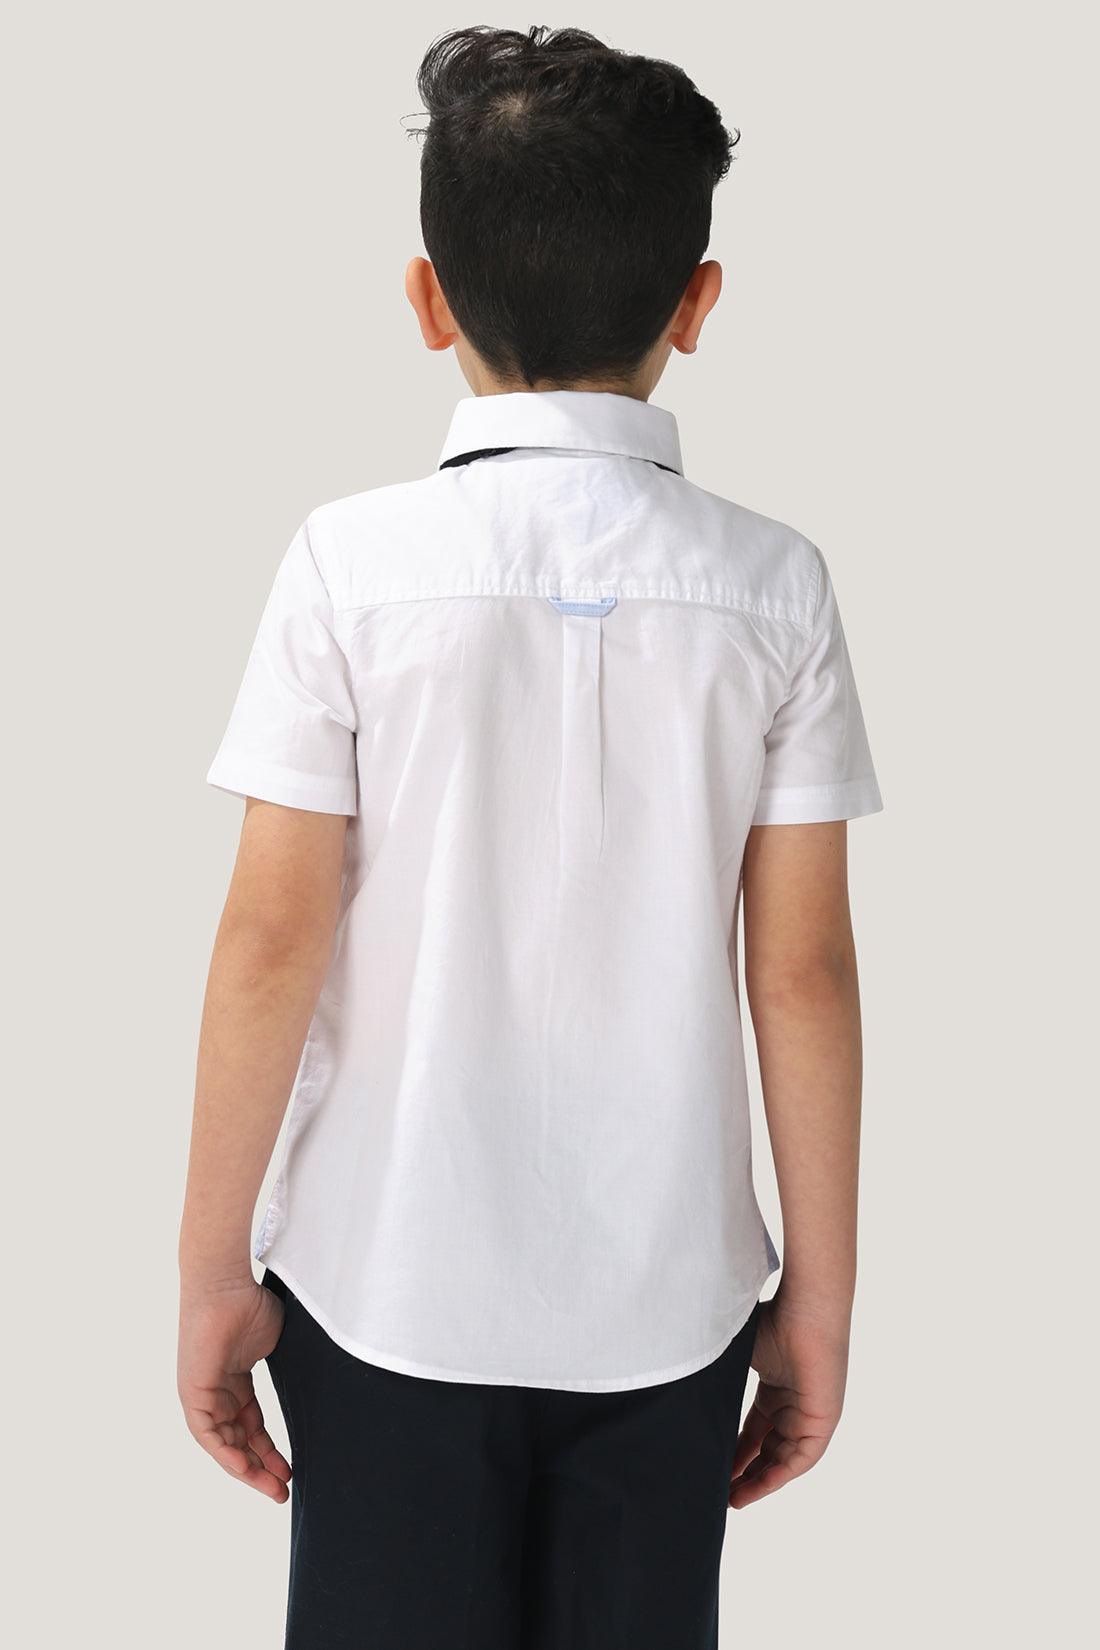 One Friday Kids Boys White 100% Cotton Shirt Sleeves Shirt With Bow - One Friday World